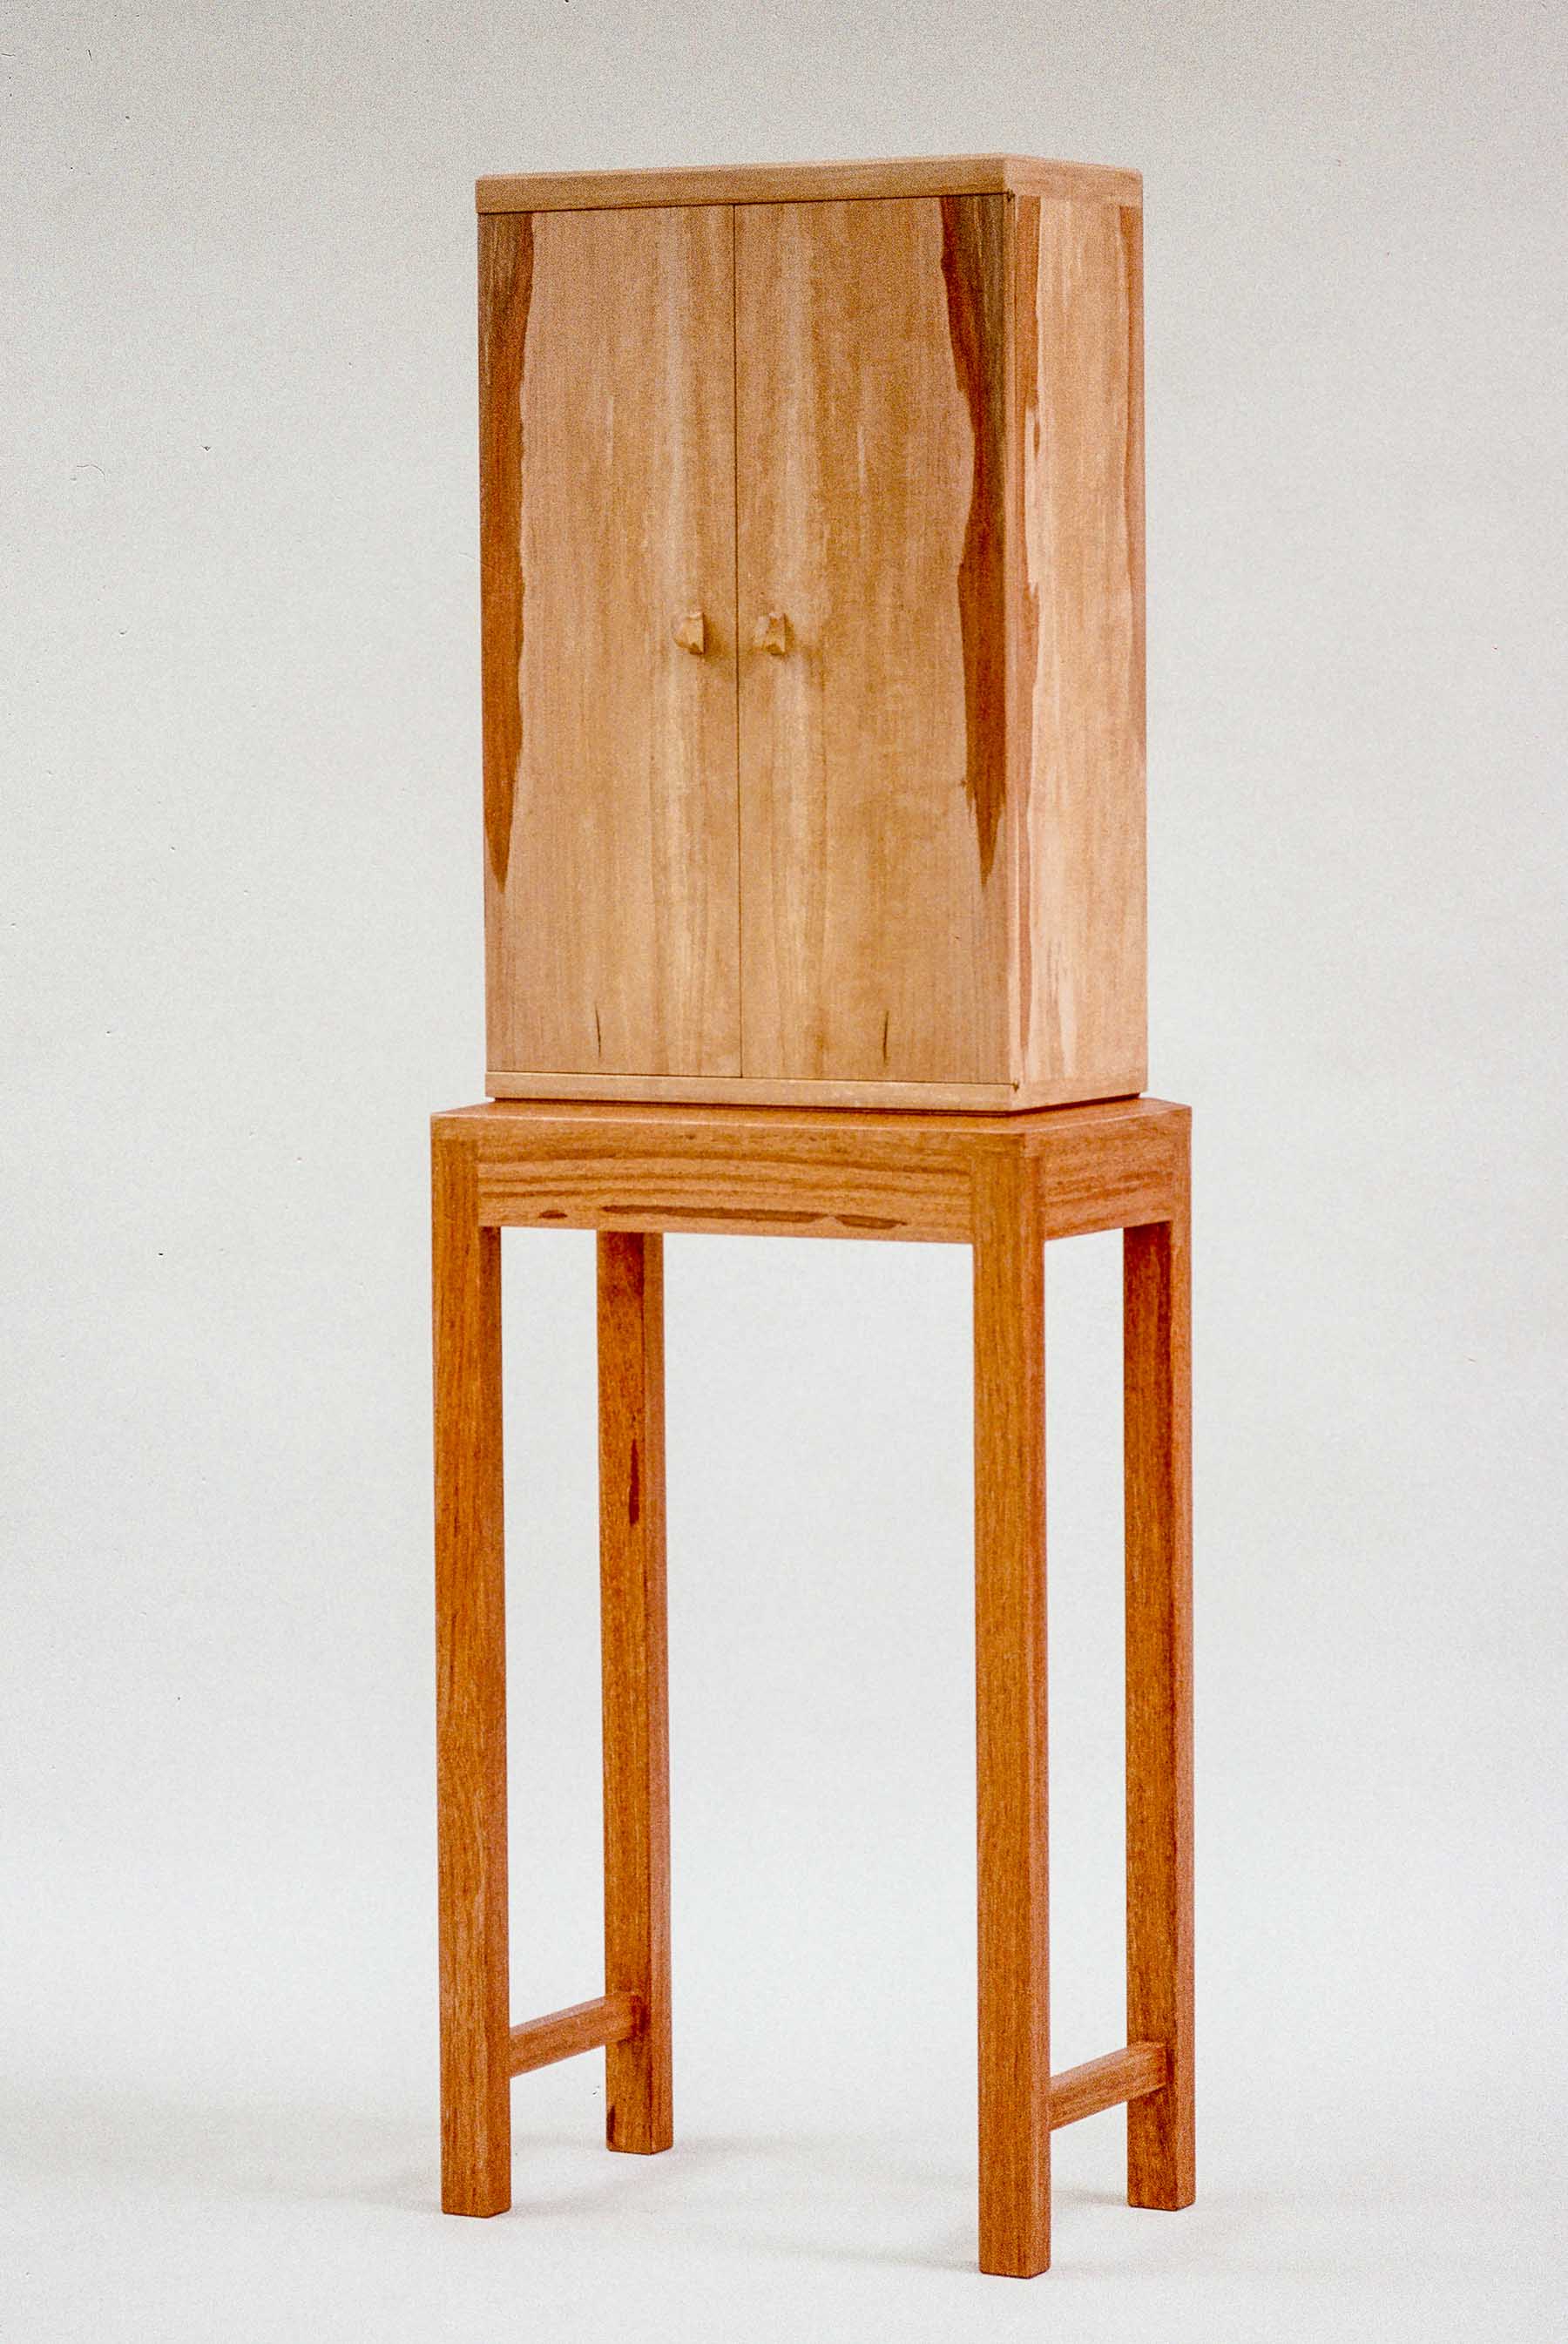 Cabinet in Unsteamed Pear Wood